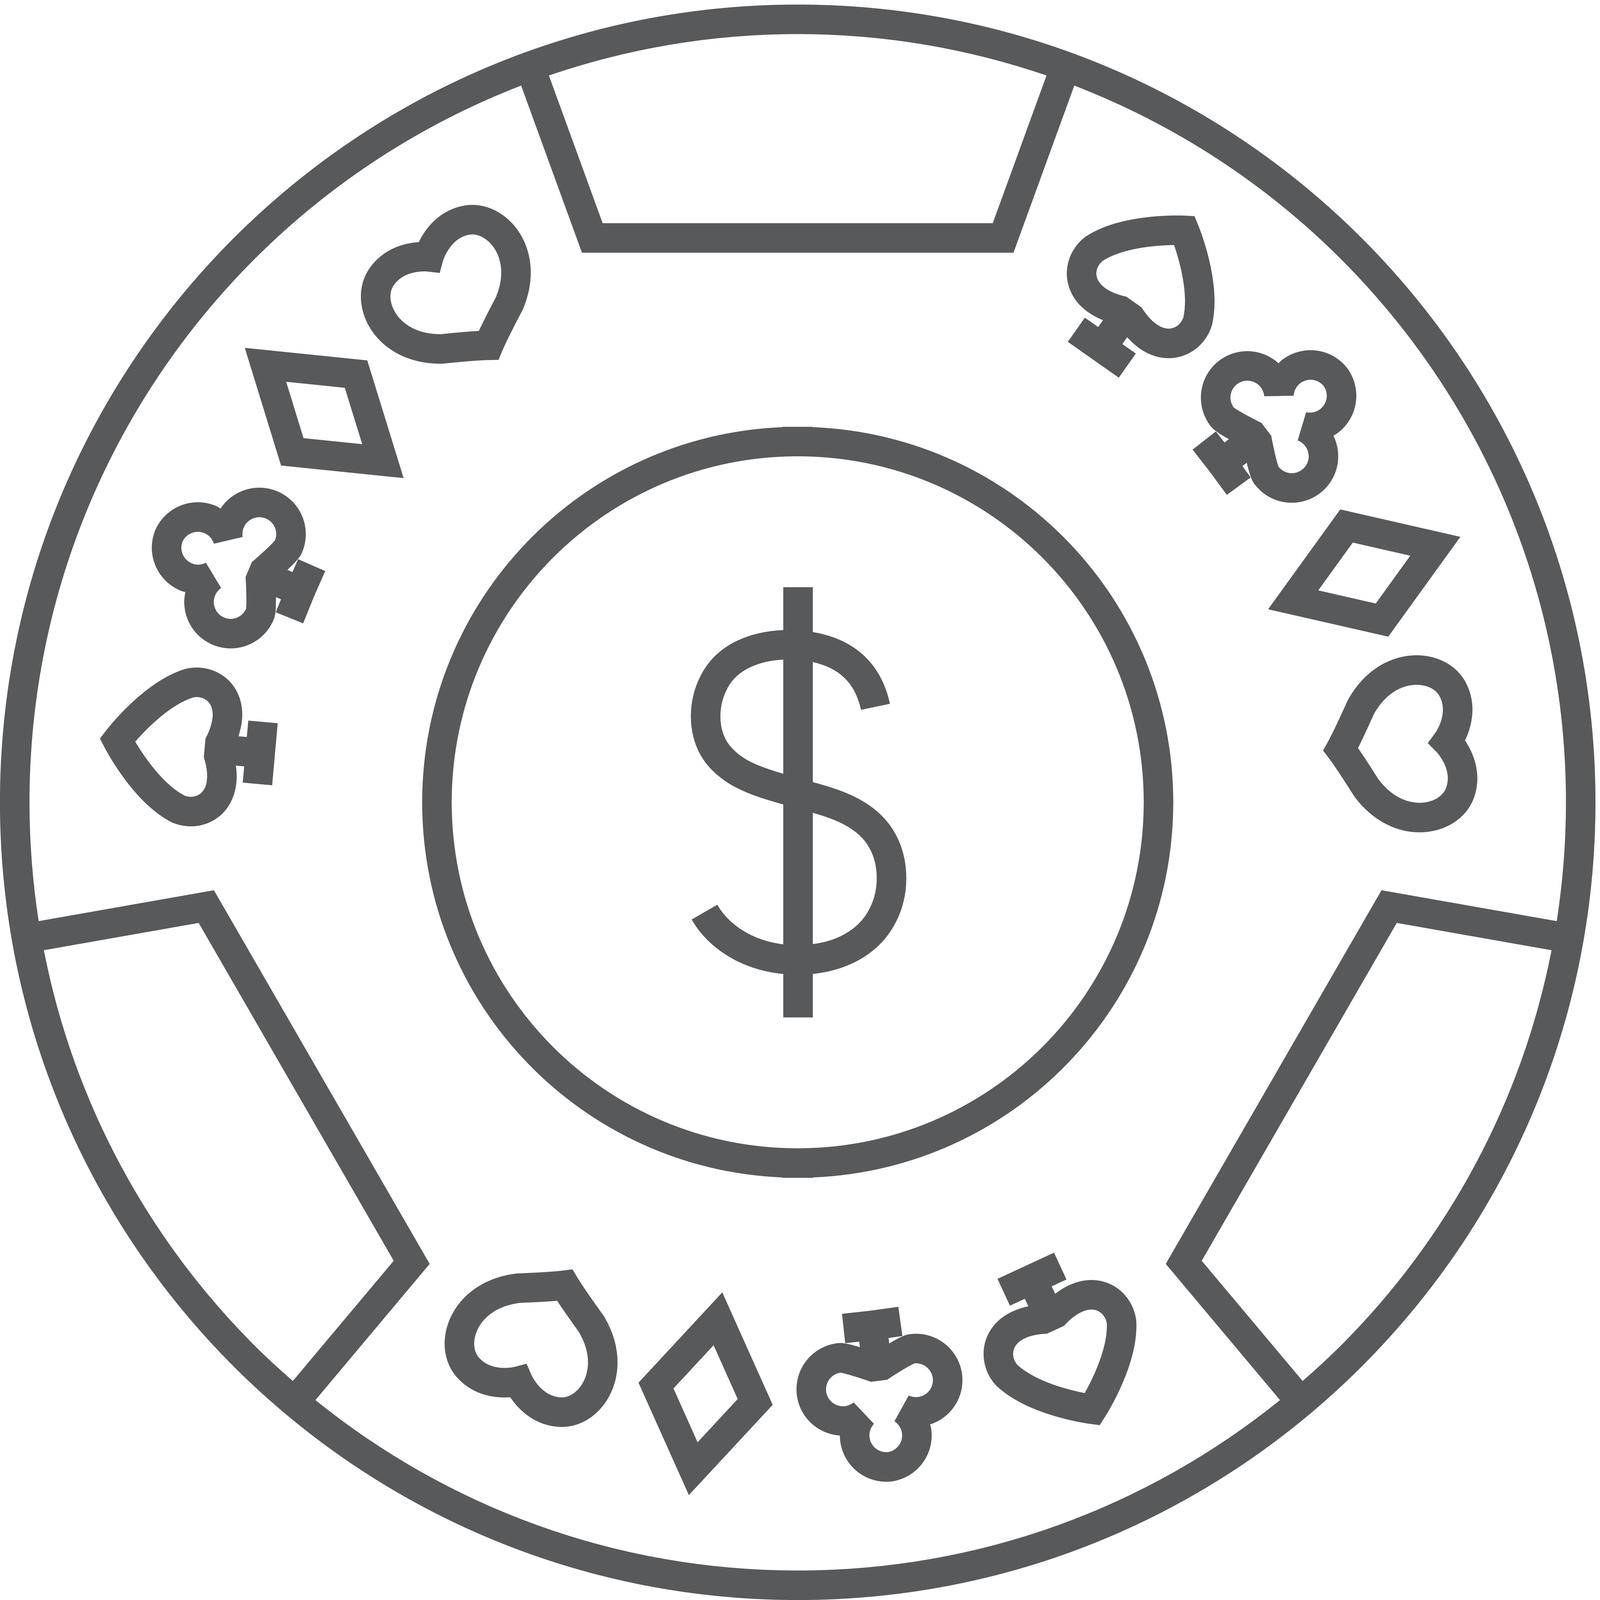 Gambling coin icon in thin outline style. Leisure activity bet chance roulette jackpot